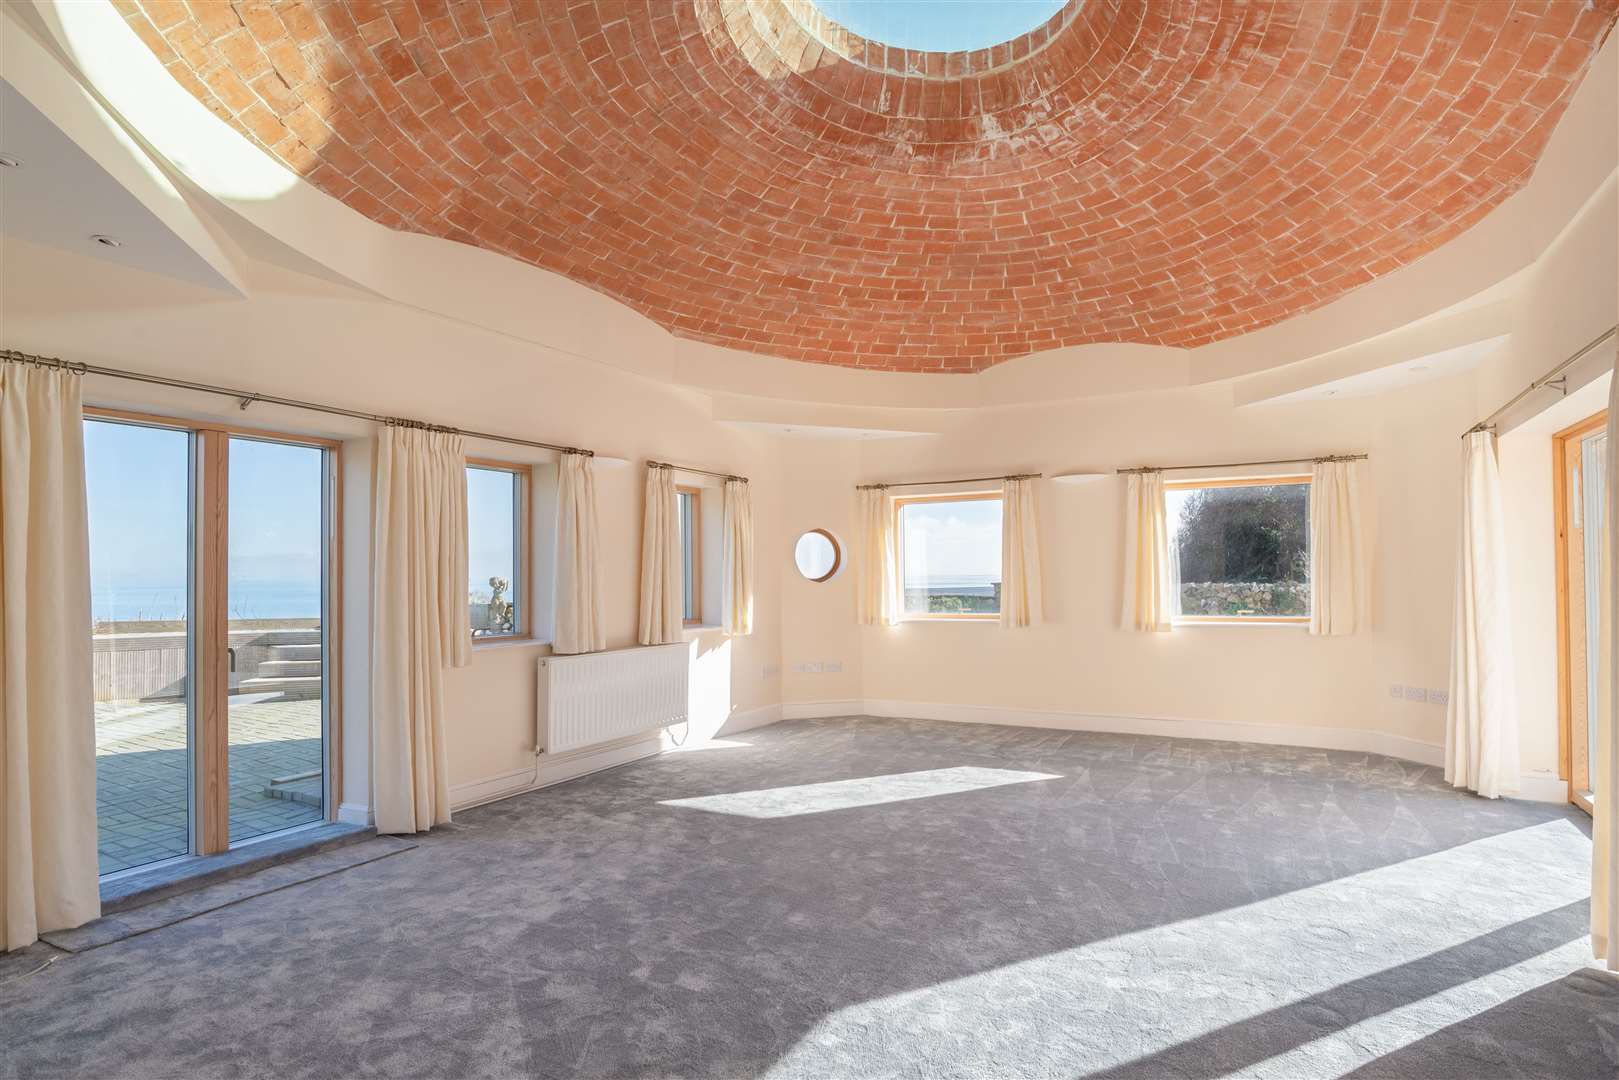 The rotunda at South Sands House Picture: Strutt and Parker